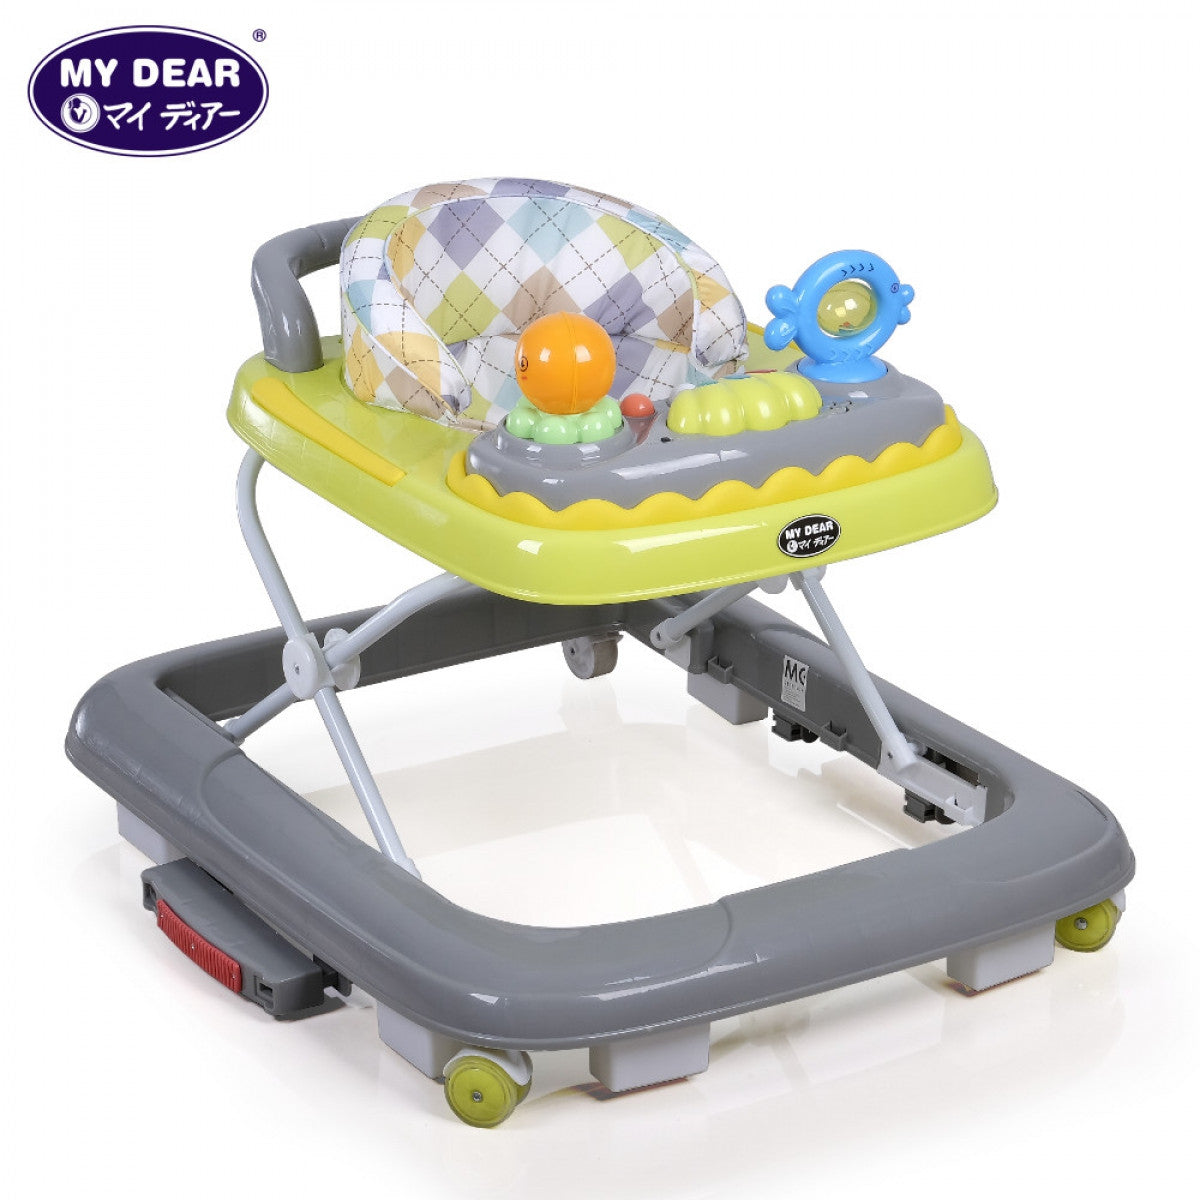 My Dear 20059 Baby Walker with Rocking Function, Detachable Music Tray & Anti Slip Pad